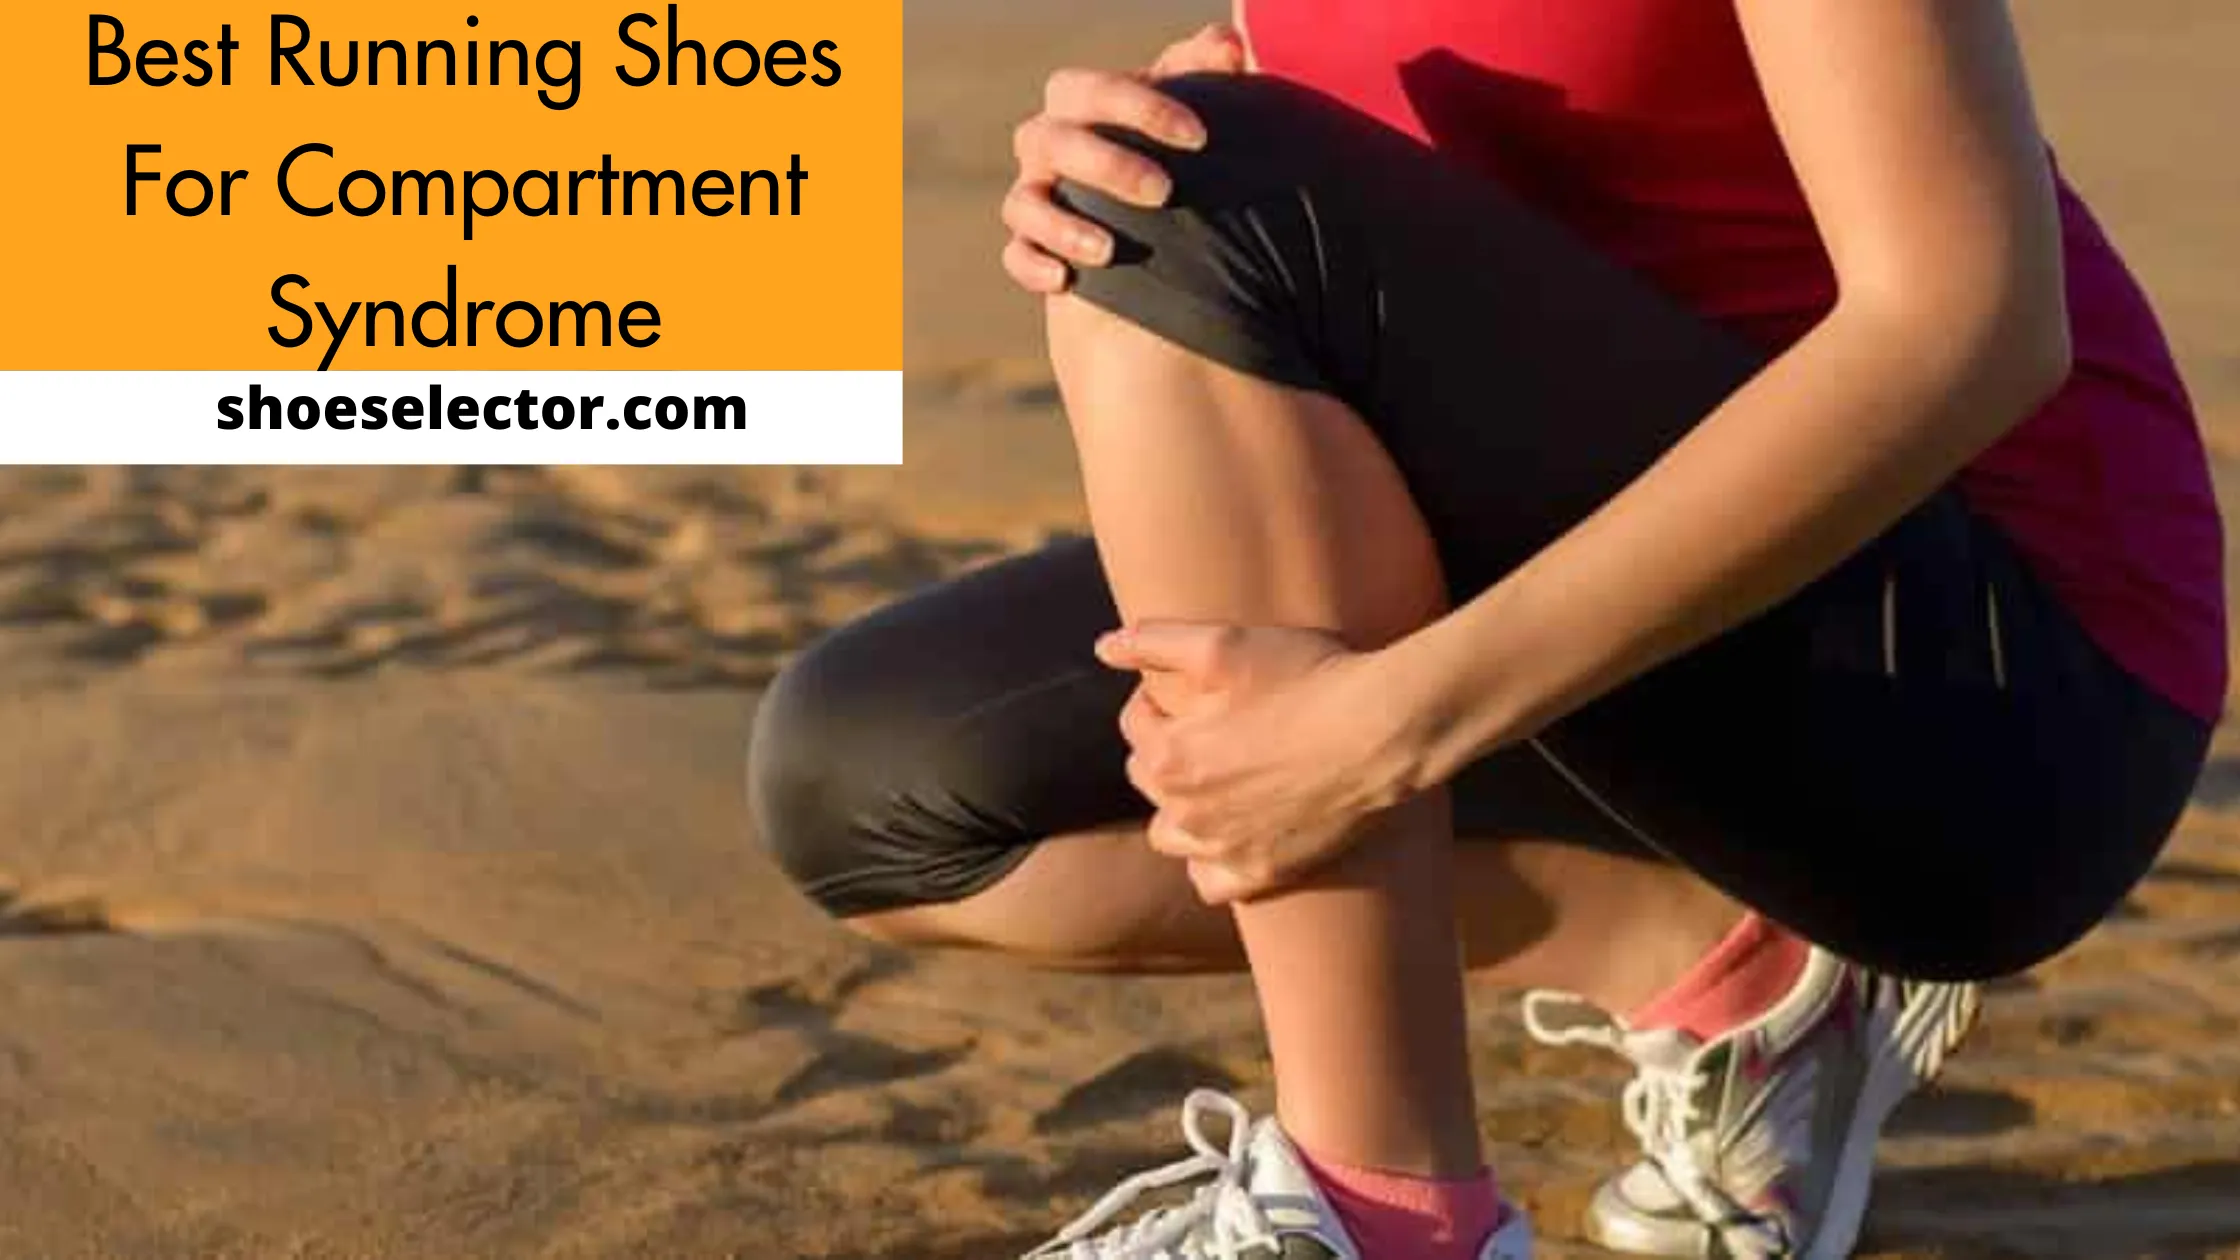 Best Running Shoes For Compartment Syndrome - Expert Choice